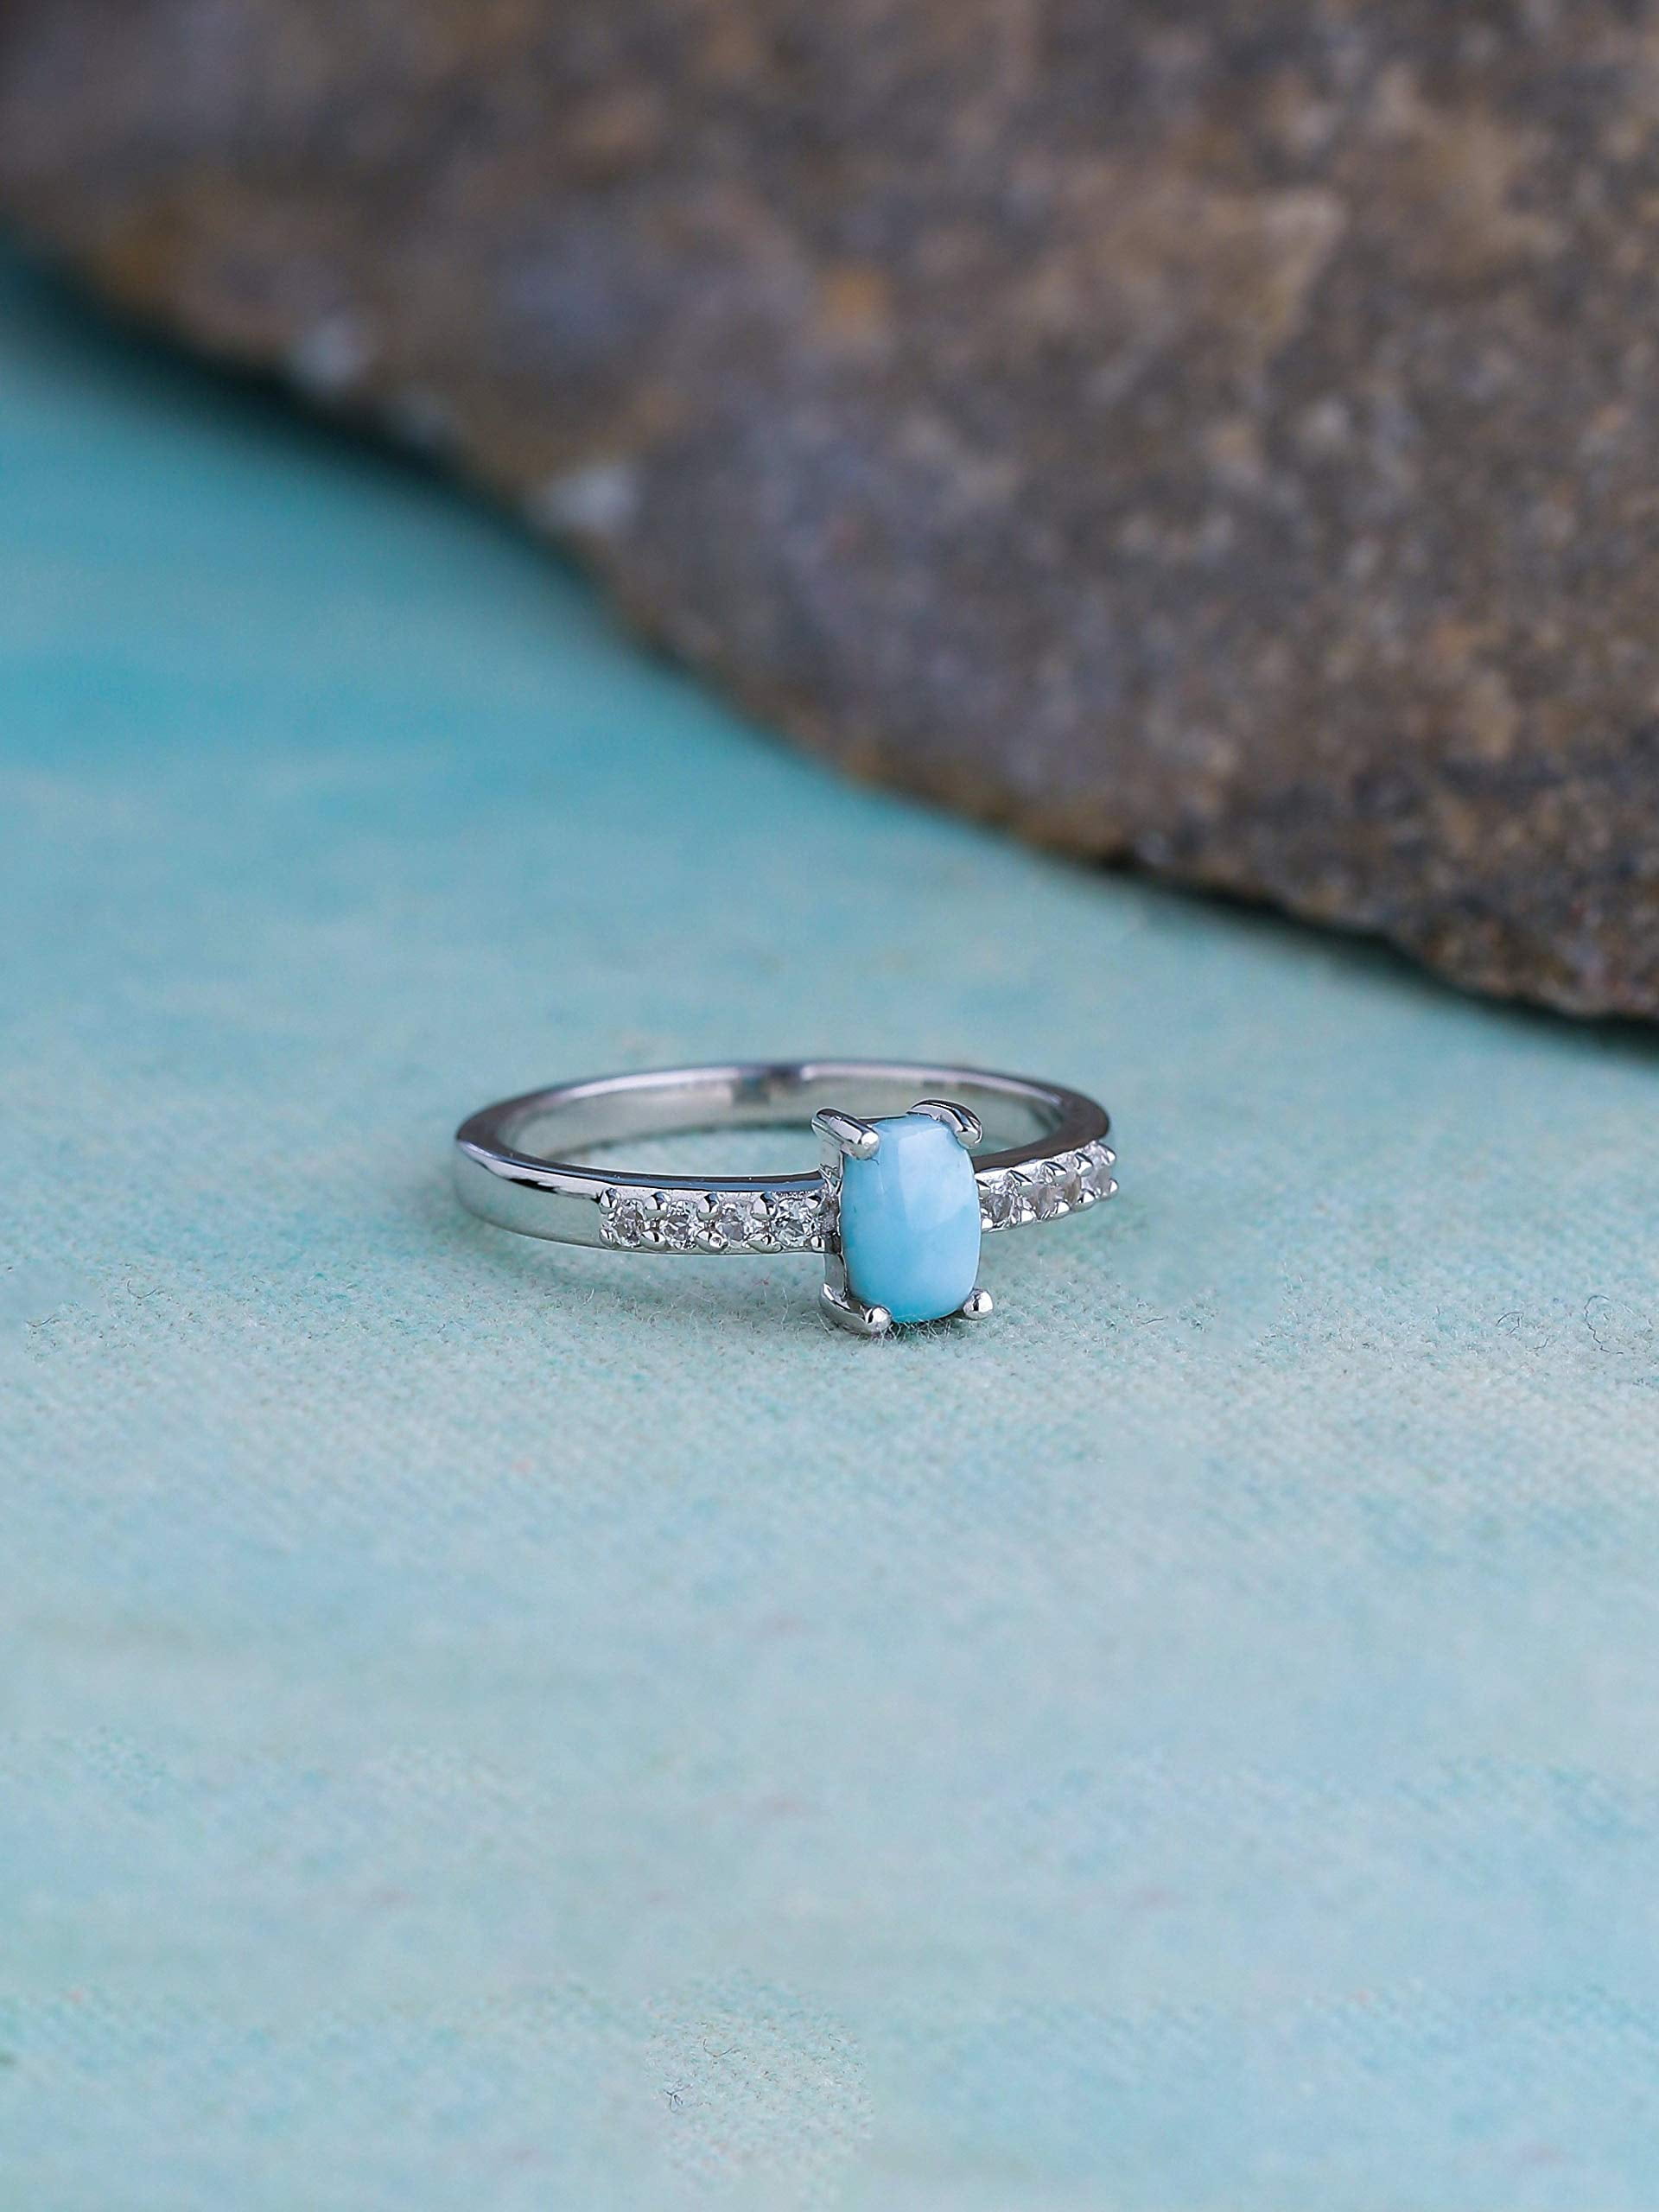 0.64 Cts. Larimar White Topaz Solid 925 Sterling Silver Ring - Walmart.com